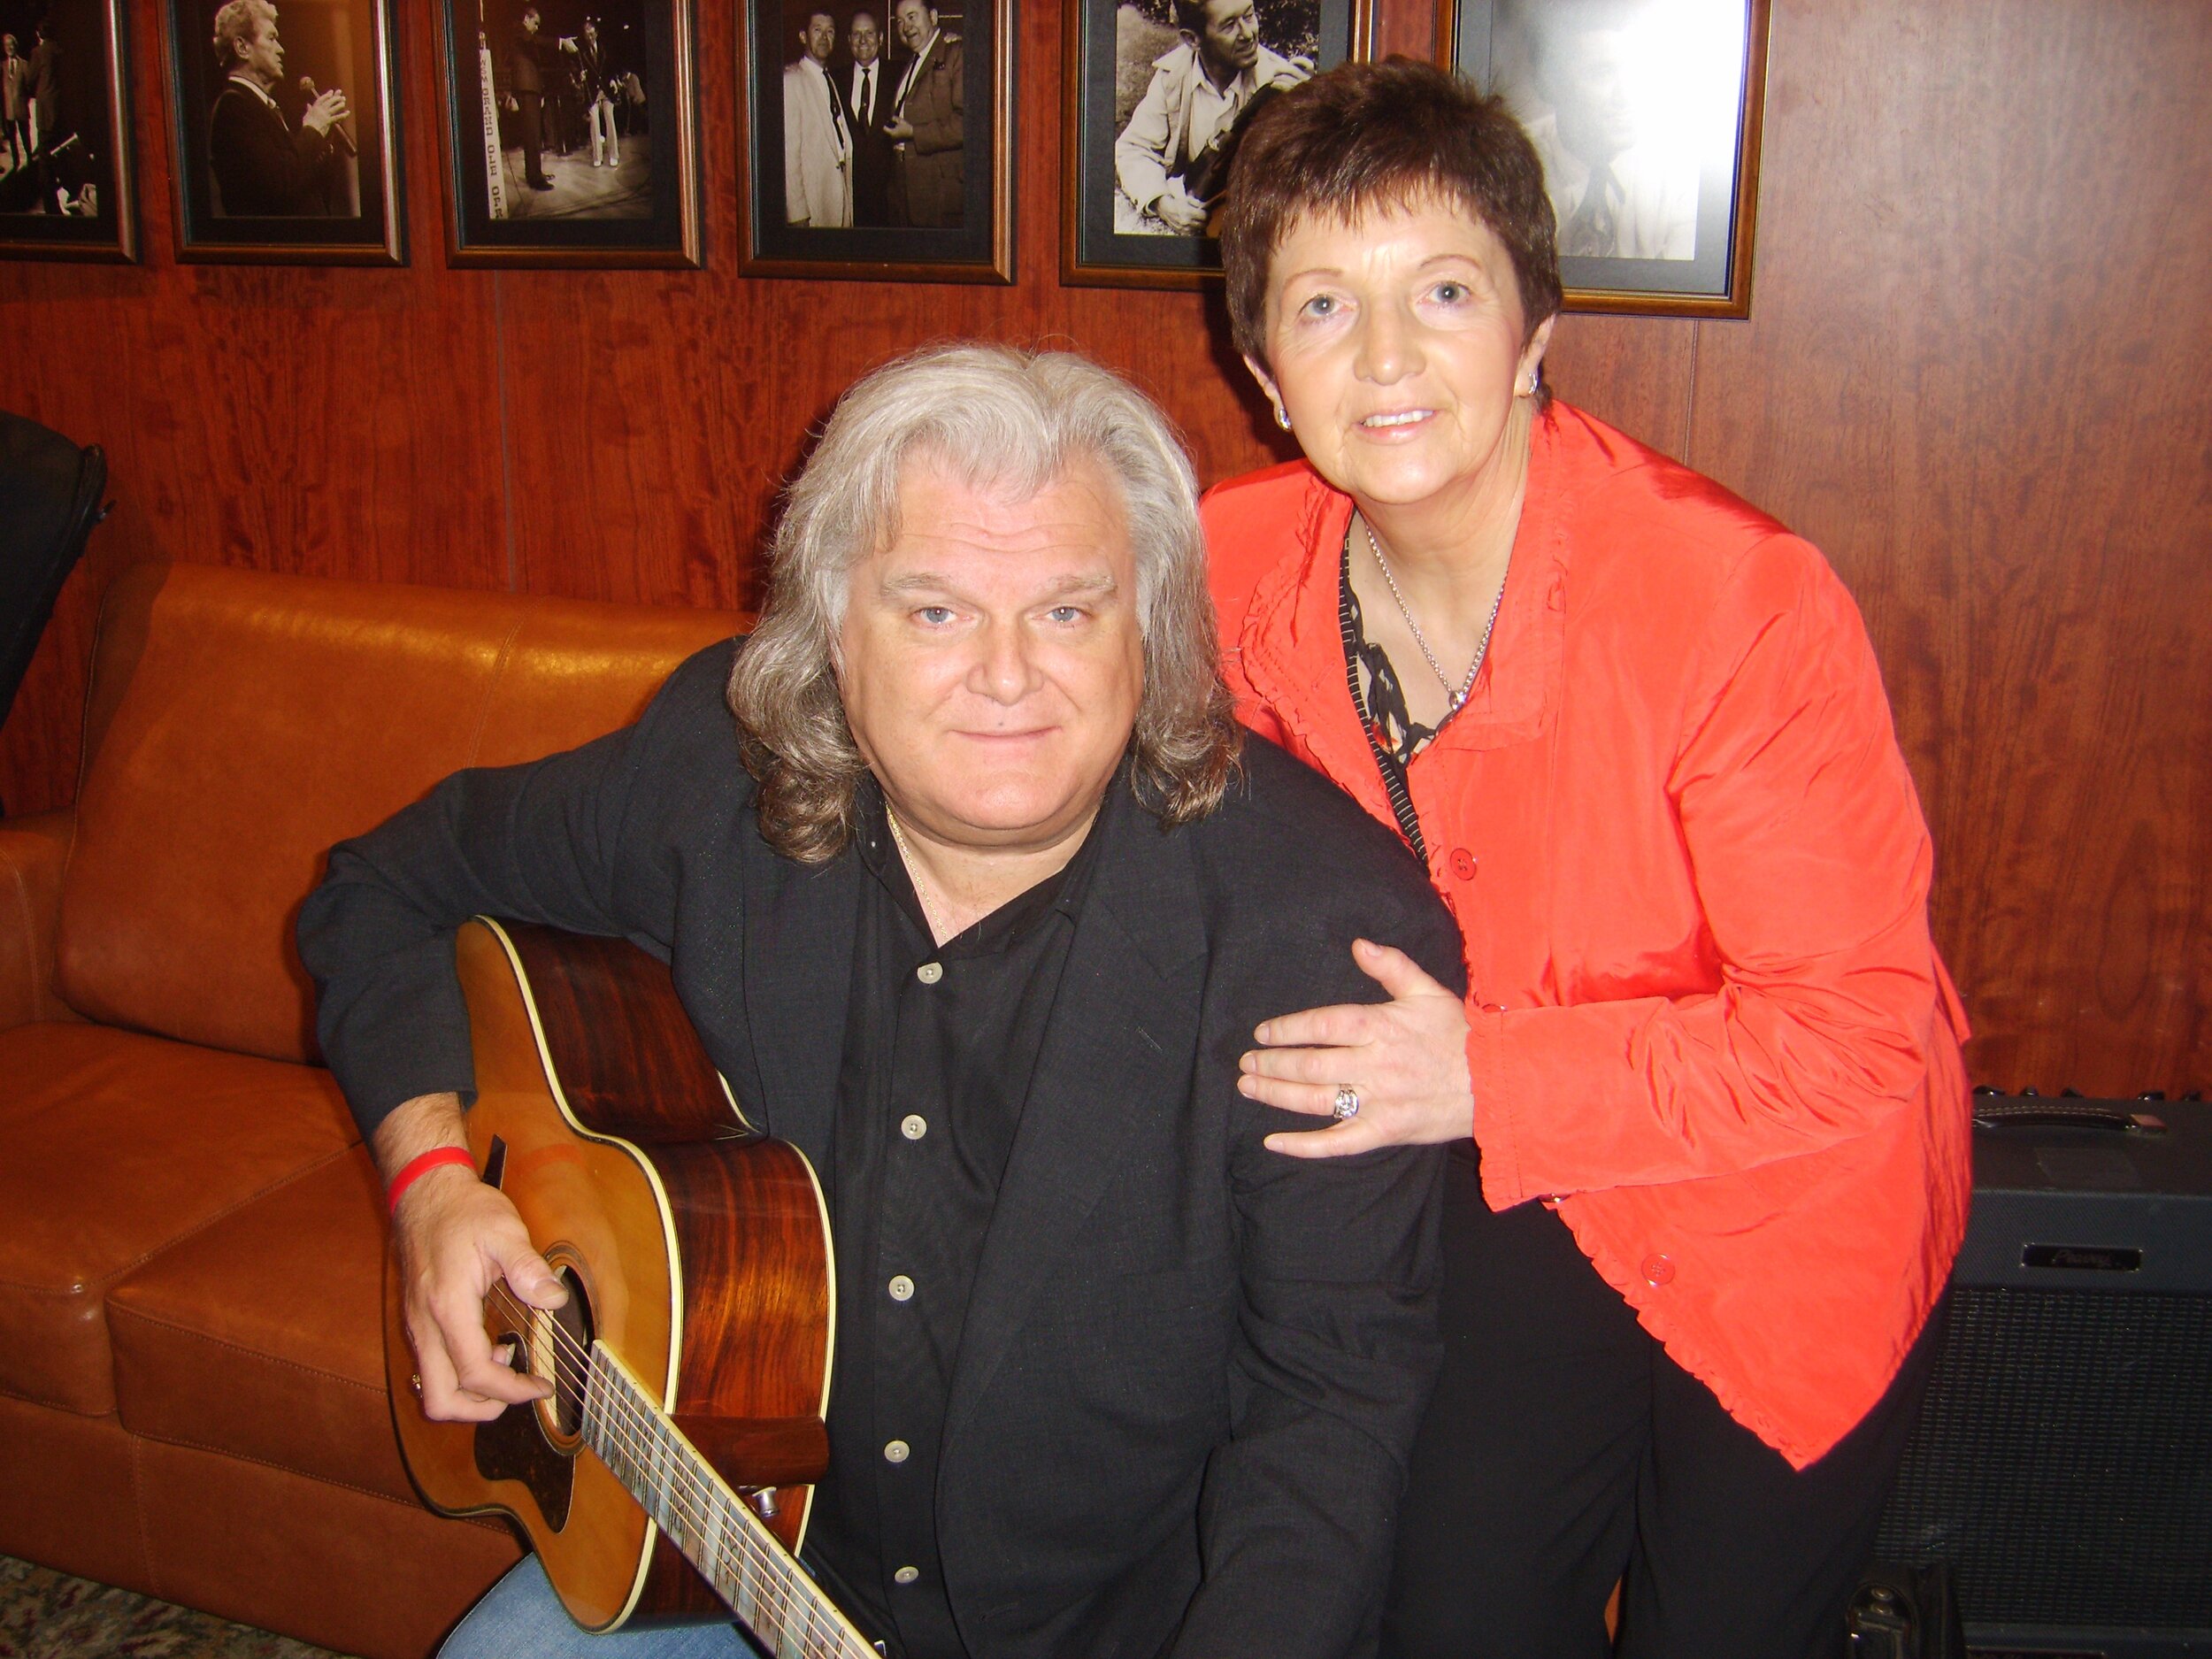  In Ricky Skaggs dressing room at the Grand Ole Opry 